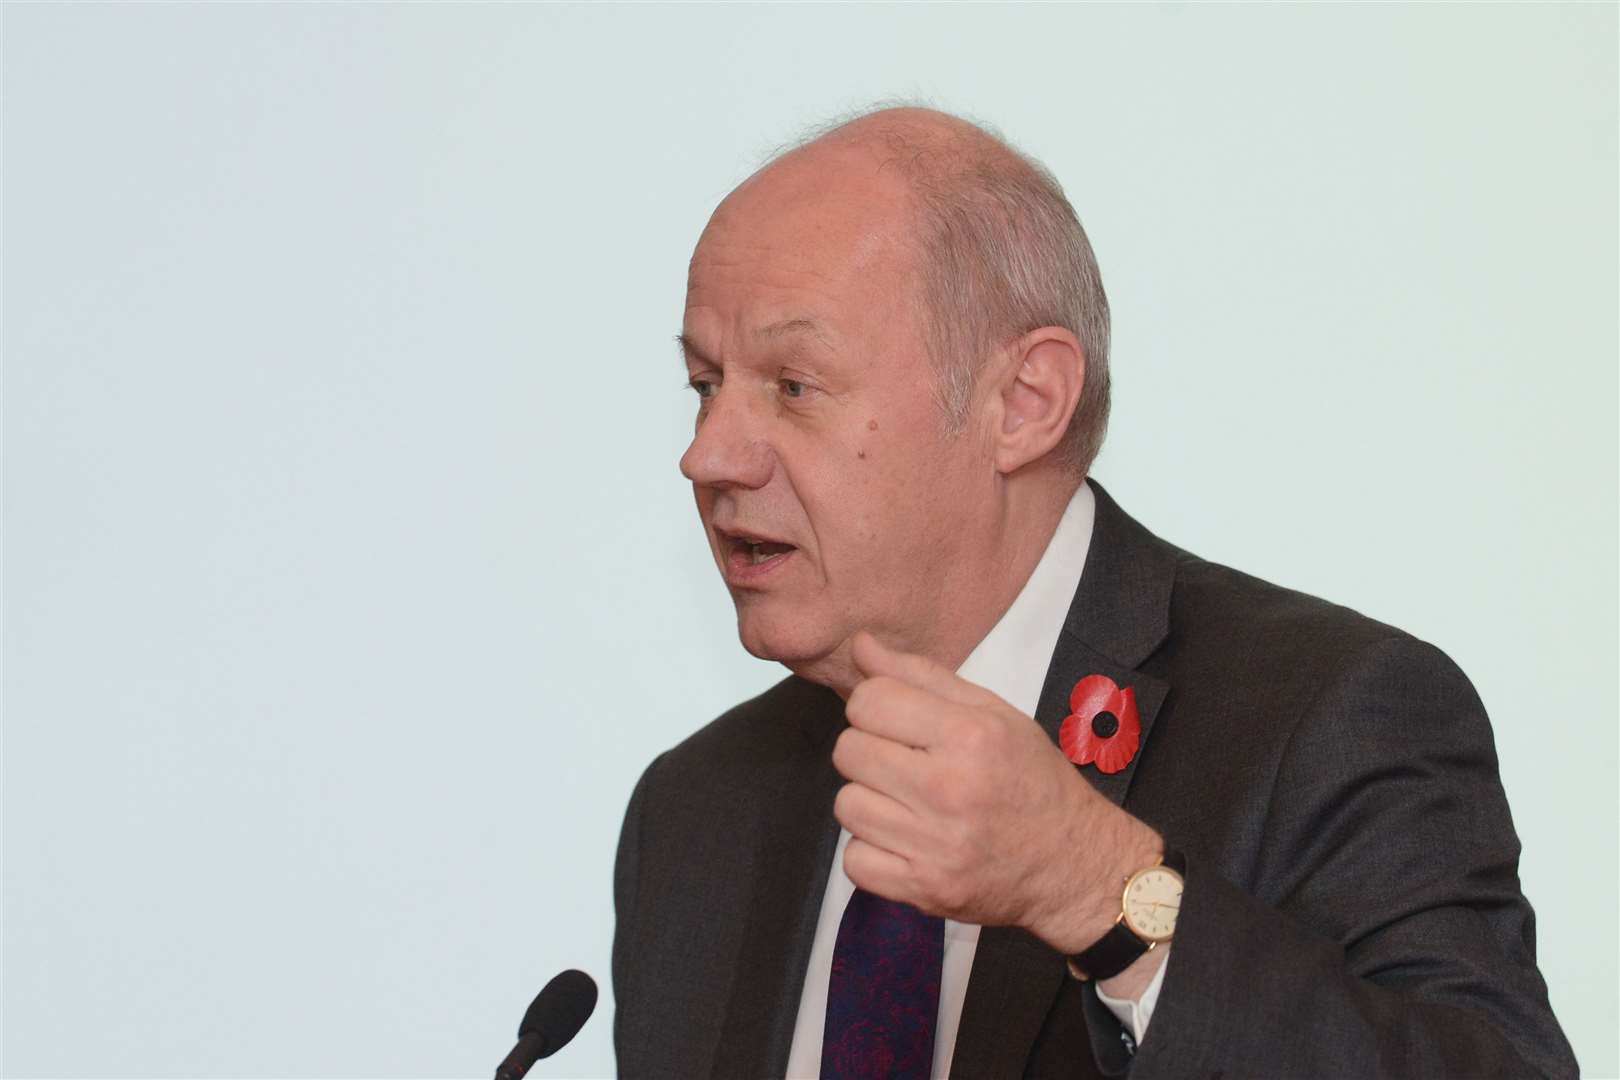 MP Damian Green has been a staunch supporter of Theresa May's Brexit plan